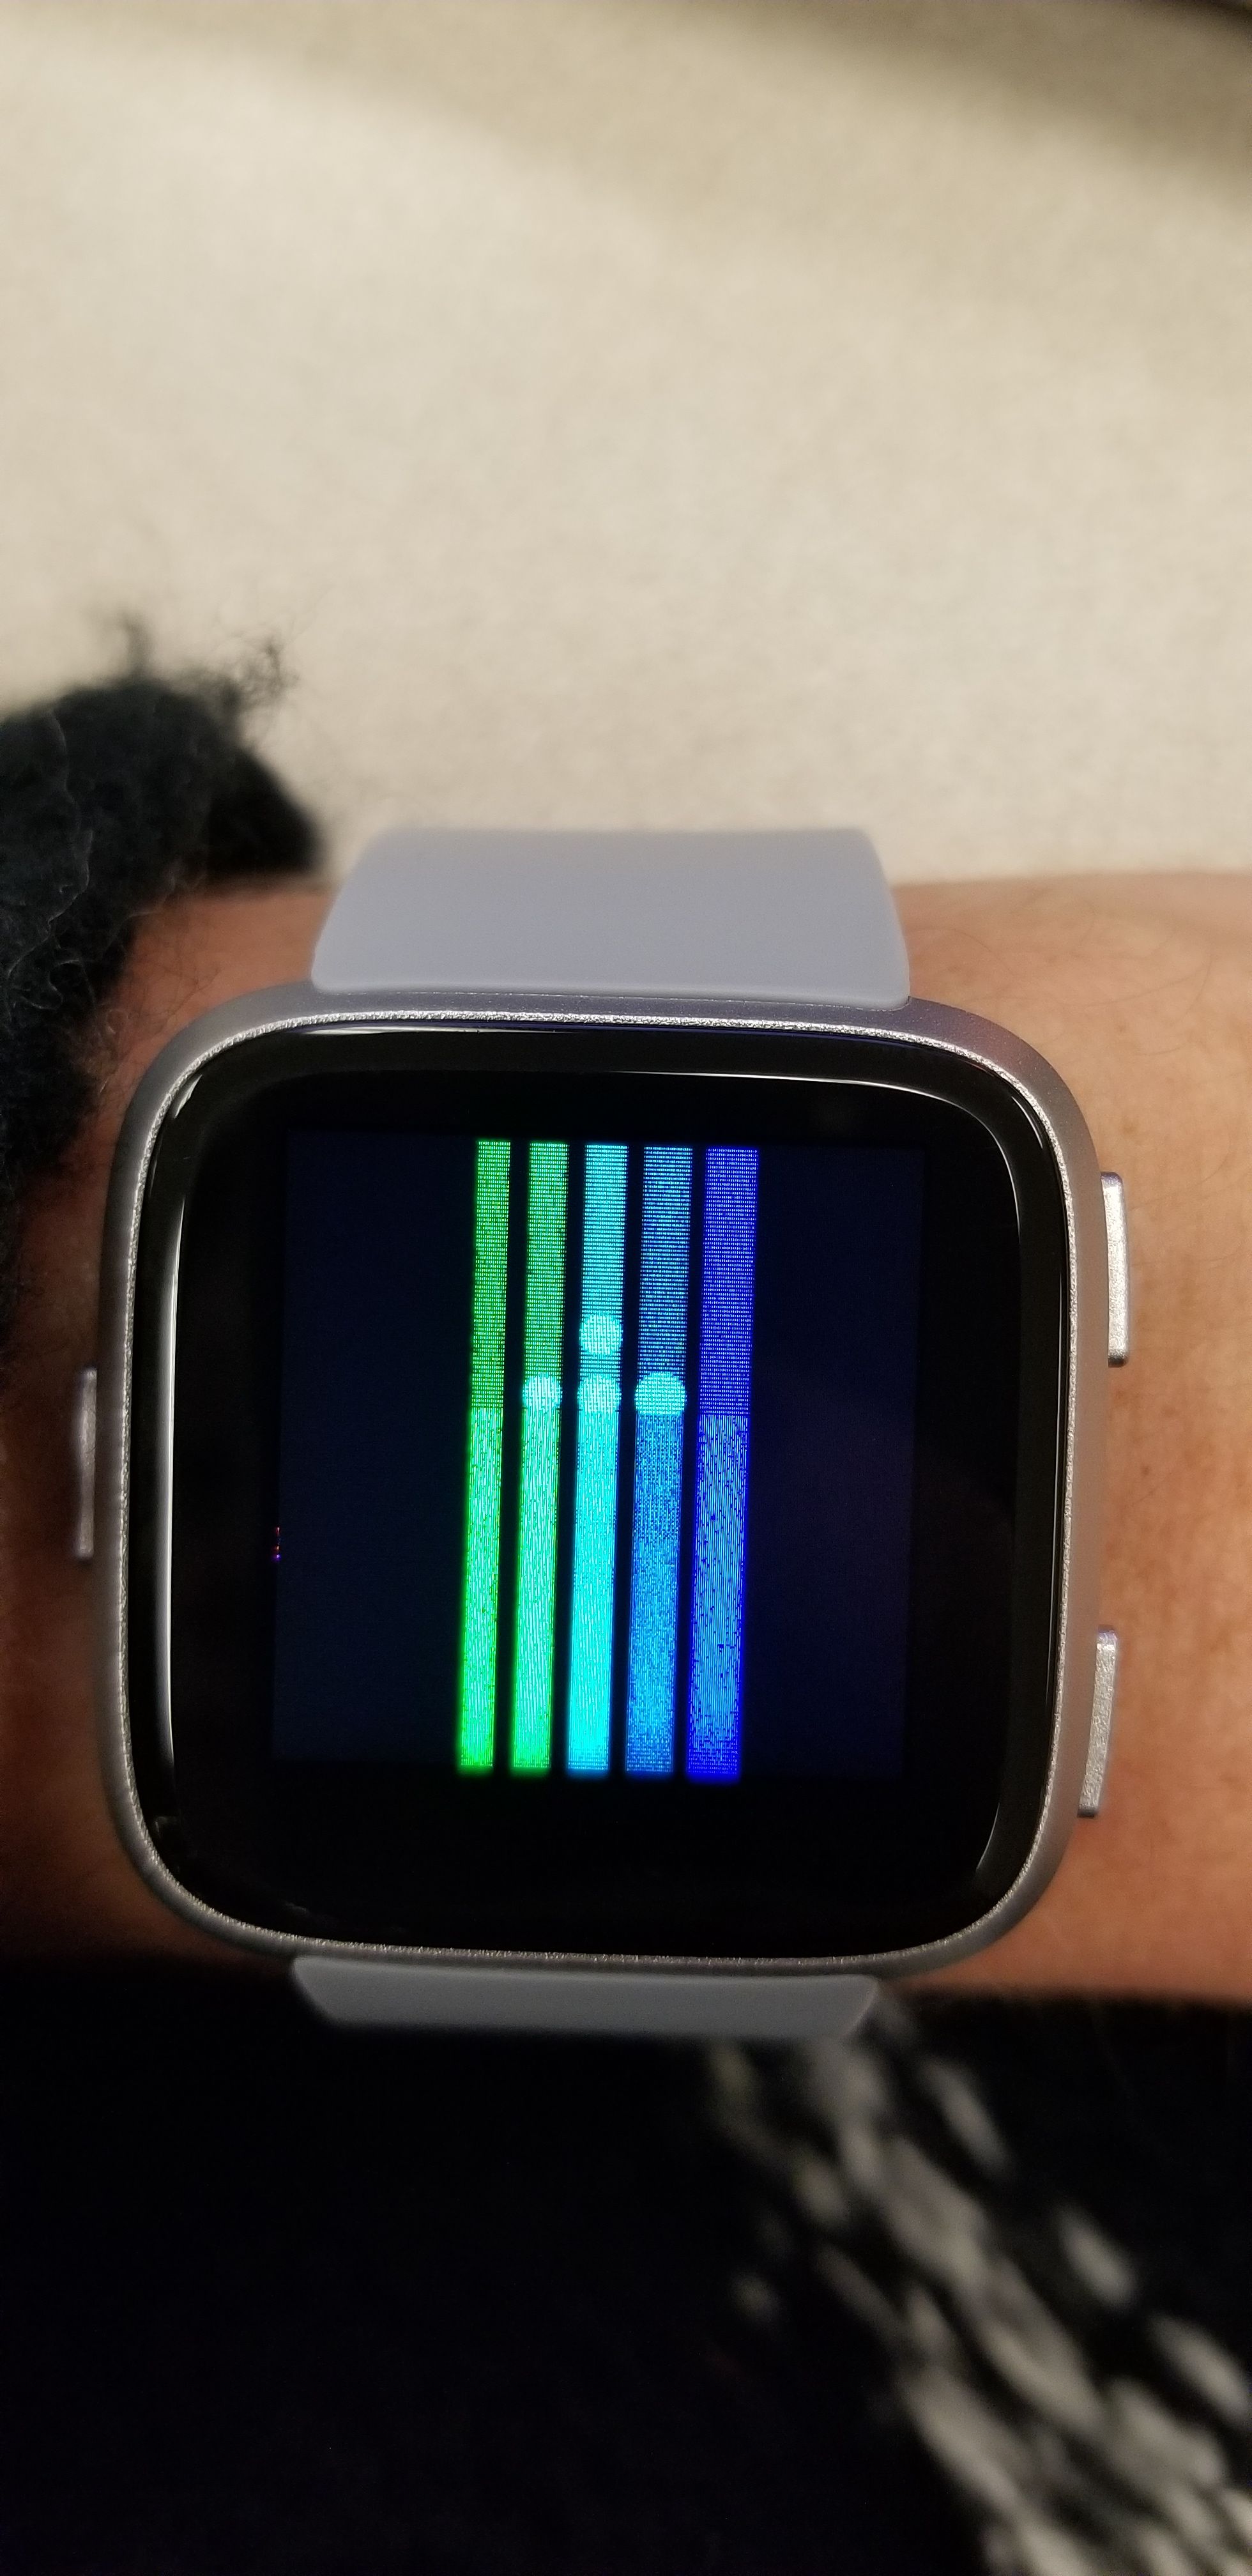 why does my fitbit have lines on the screen